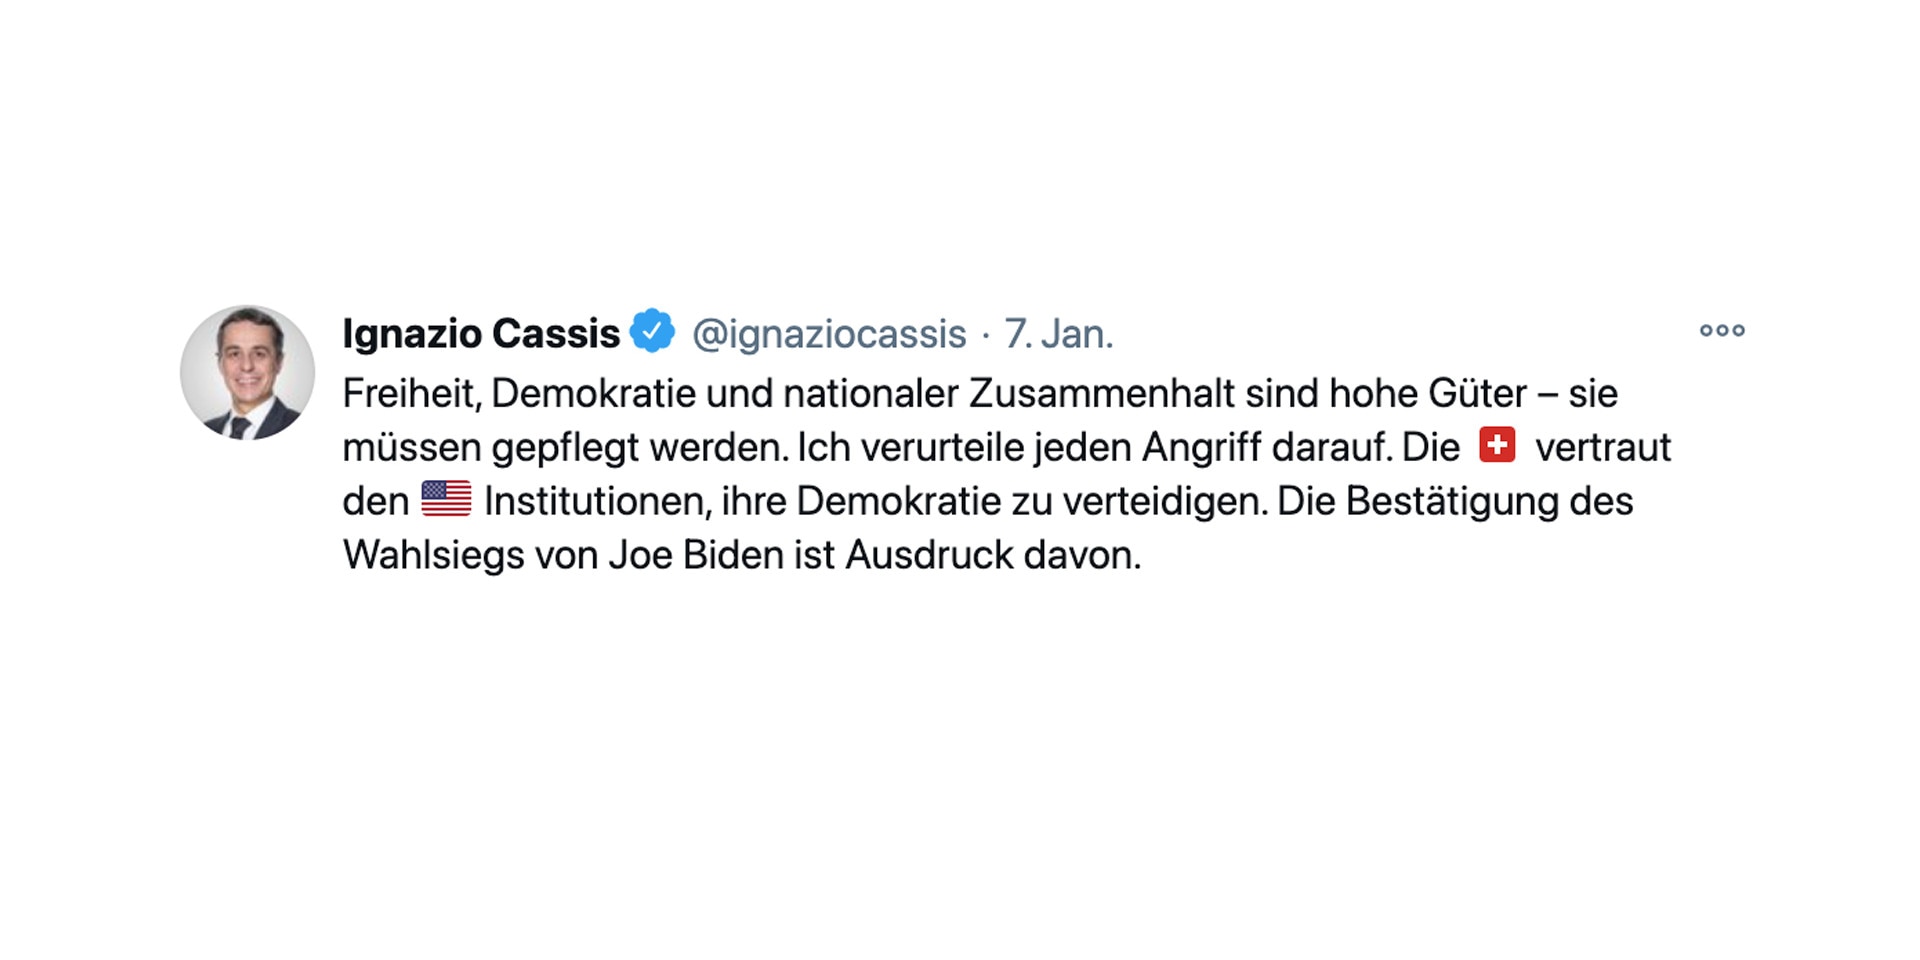 Image of the tweet published by Federal Councillor Ignazio Cassis after the events in Washington.